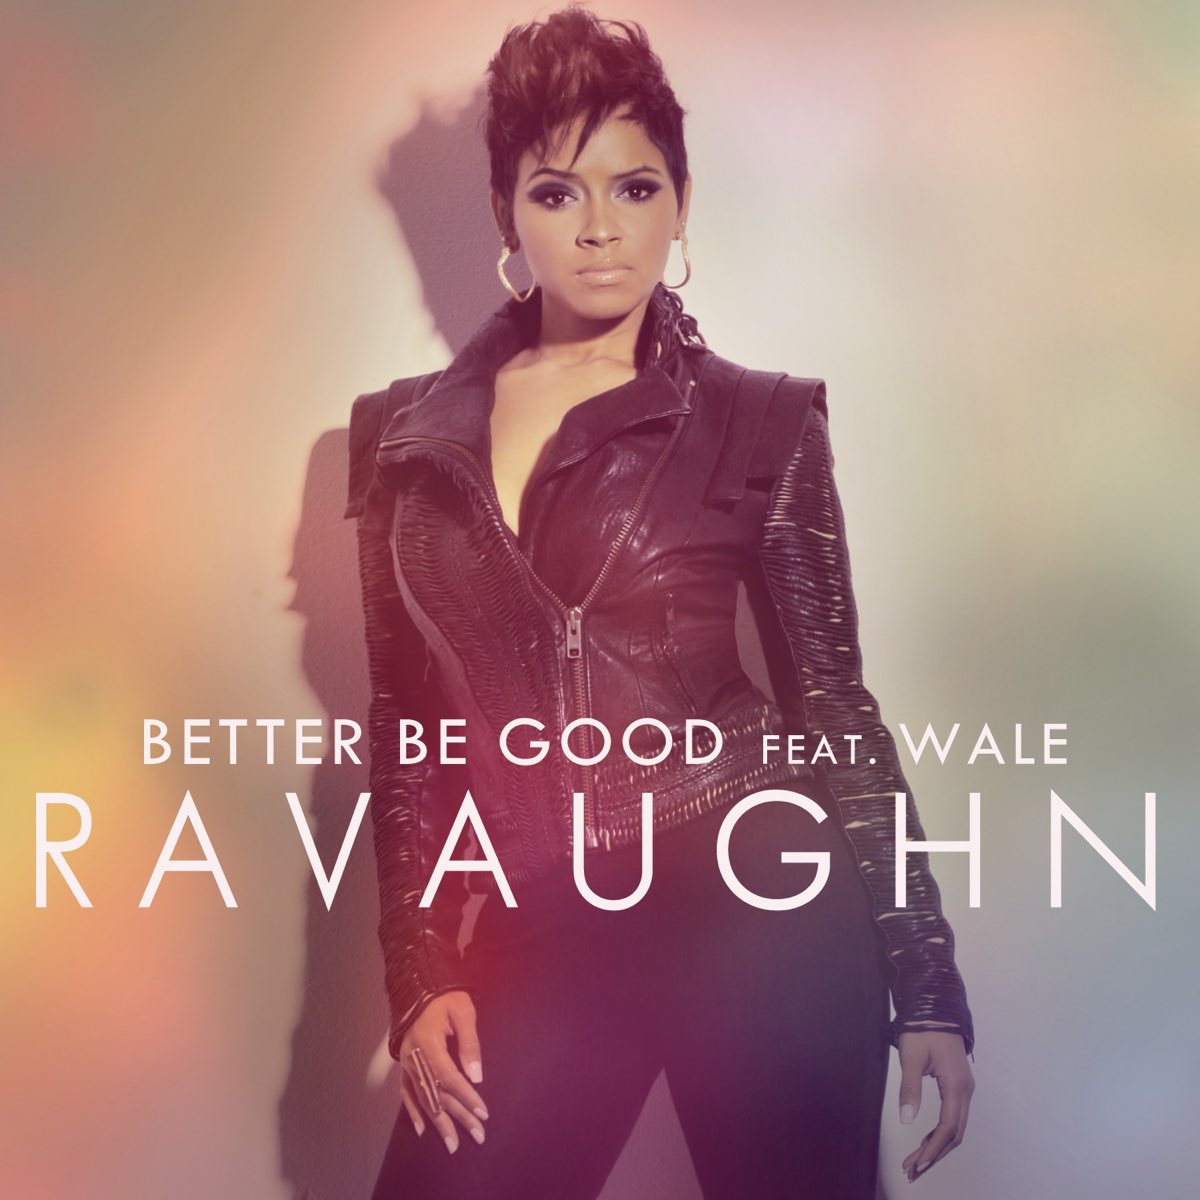 Better feat. RAVAUGHN. We're good альбом. Песни Ana Wale she. Which is better слушать музыку.